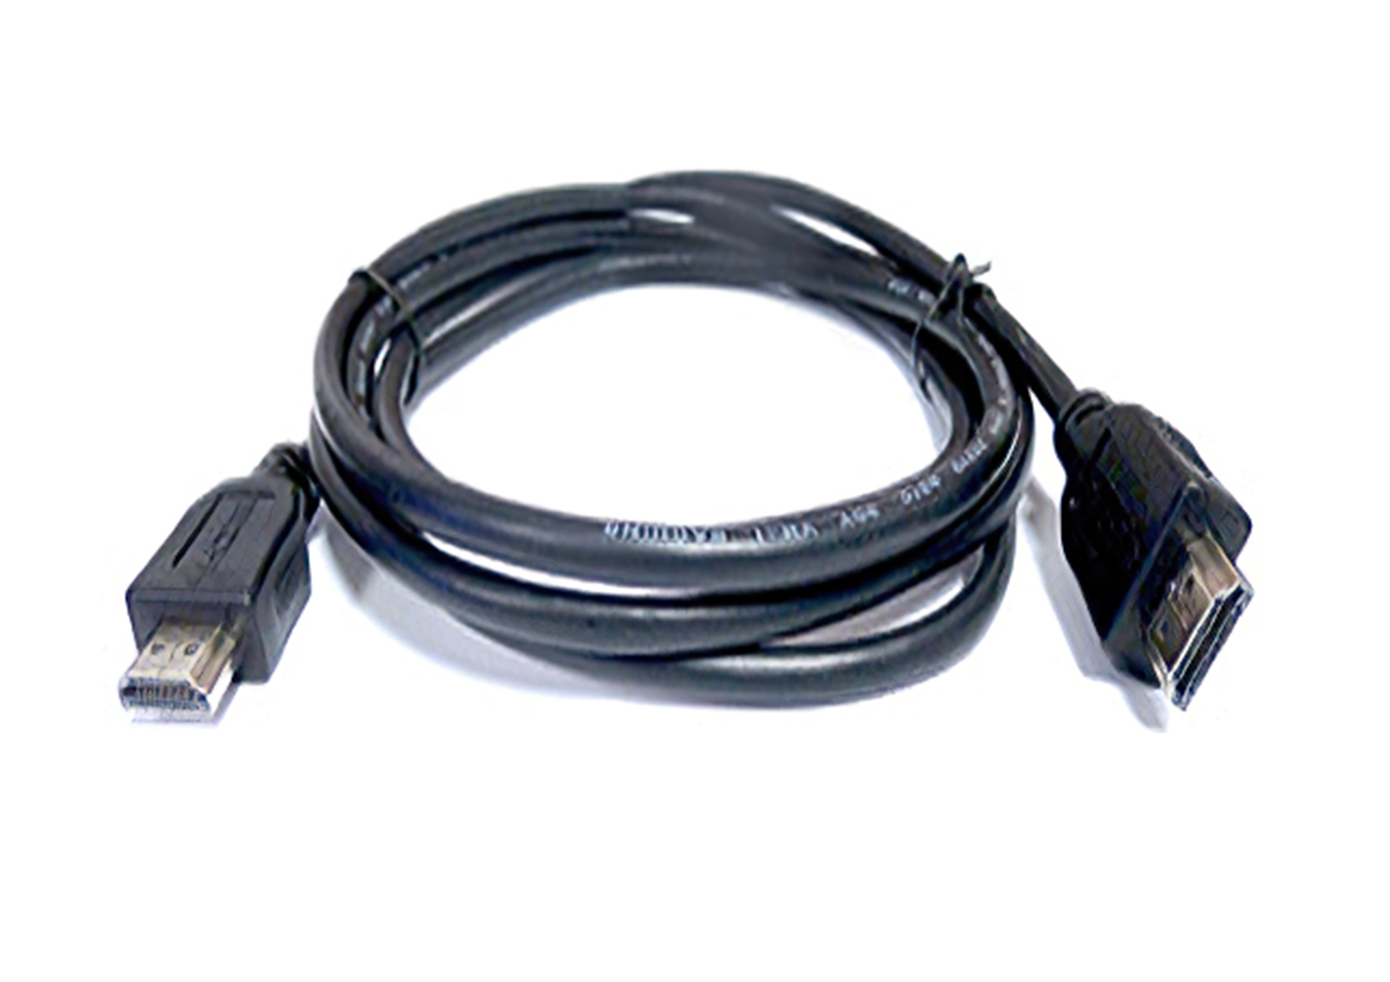 Cable, HDMI <sup>&reg;</sup> to HDMI <sup>&reg;</sup>, 6 ft.<br/>

<span class="clsSpnProdMdls">For RMI5001, cMT-FHD only</span>